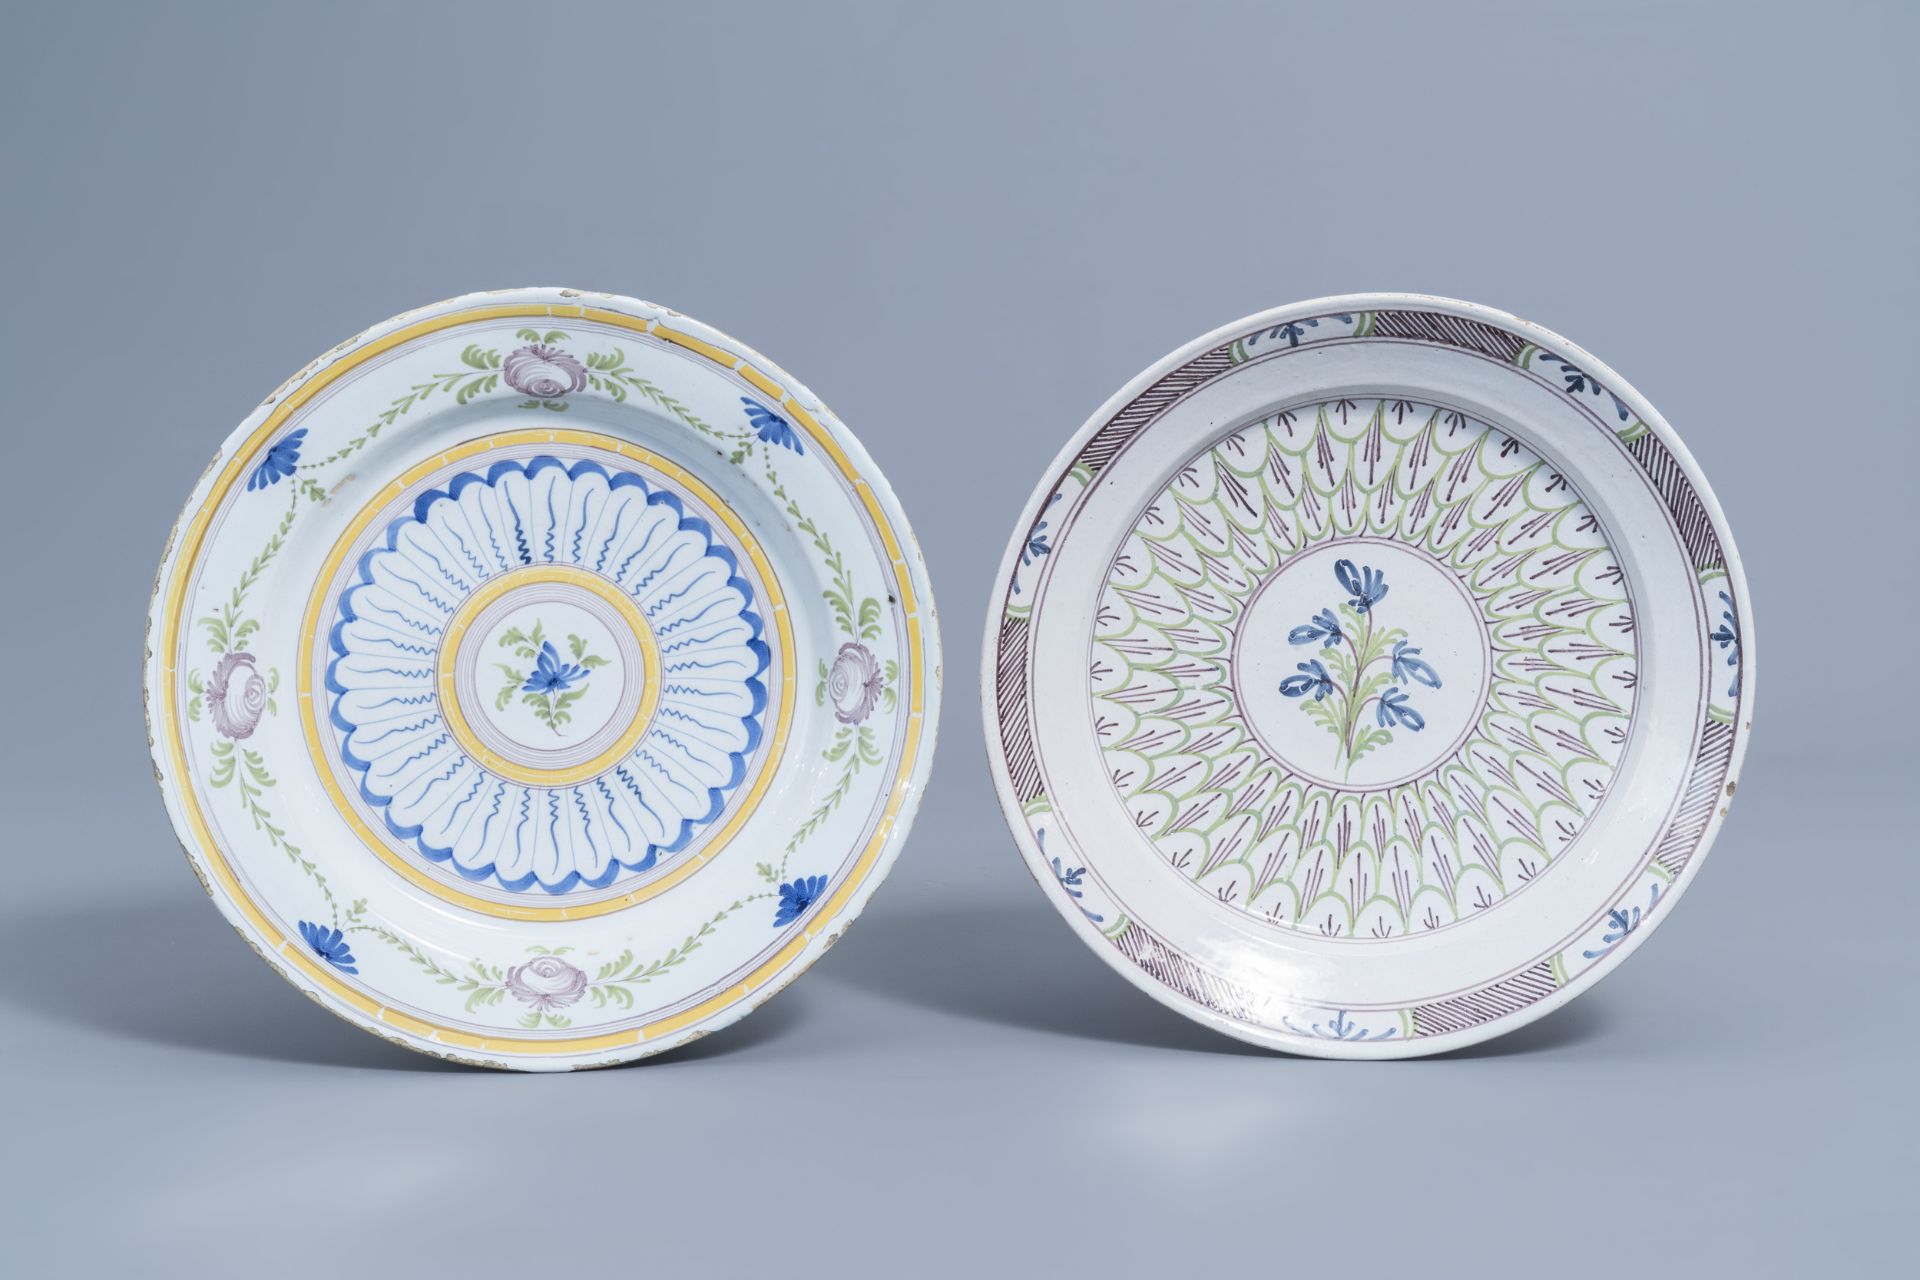 Five polychrome Brussels faience plates with floral design, 18th/19th C. - Image 4 of 12